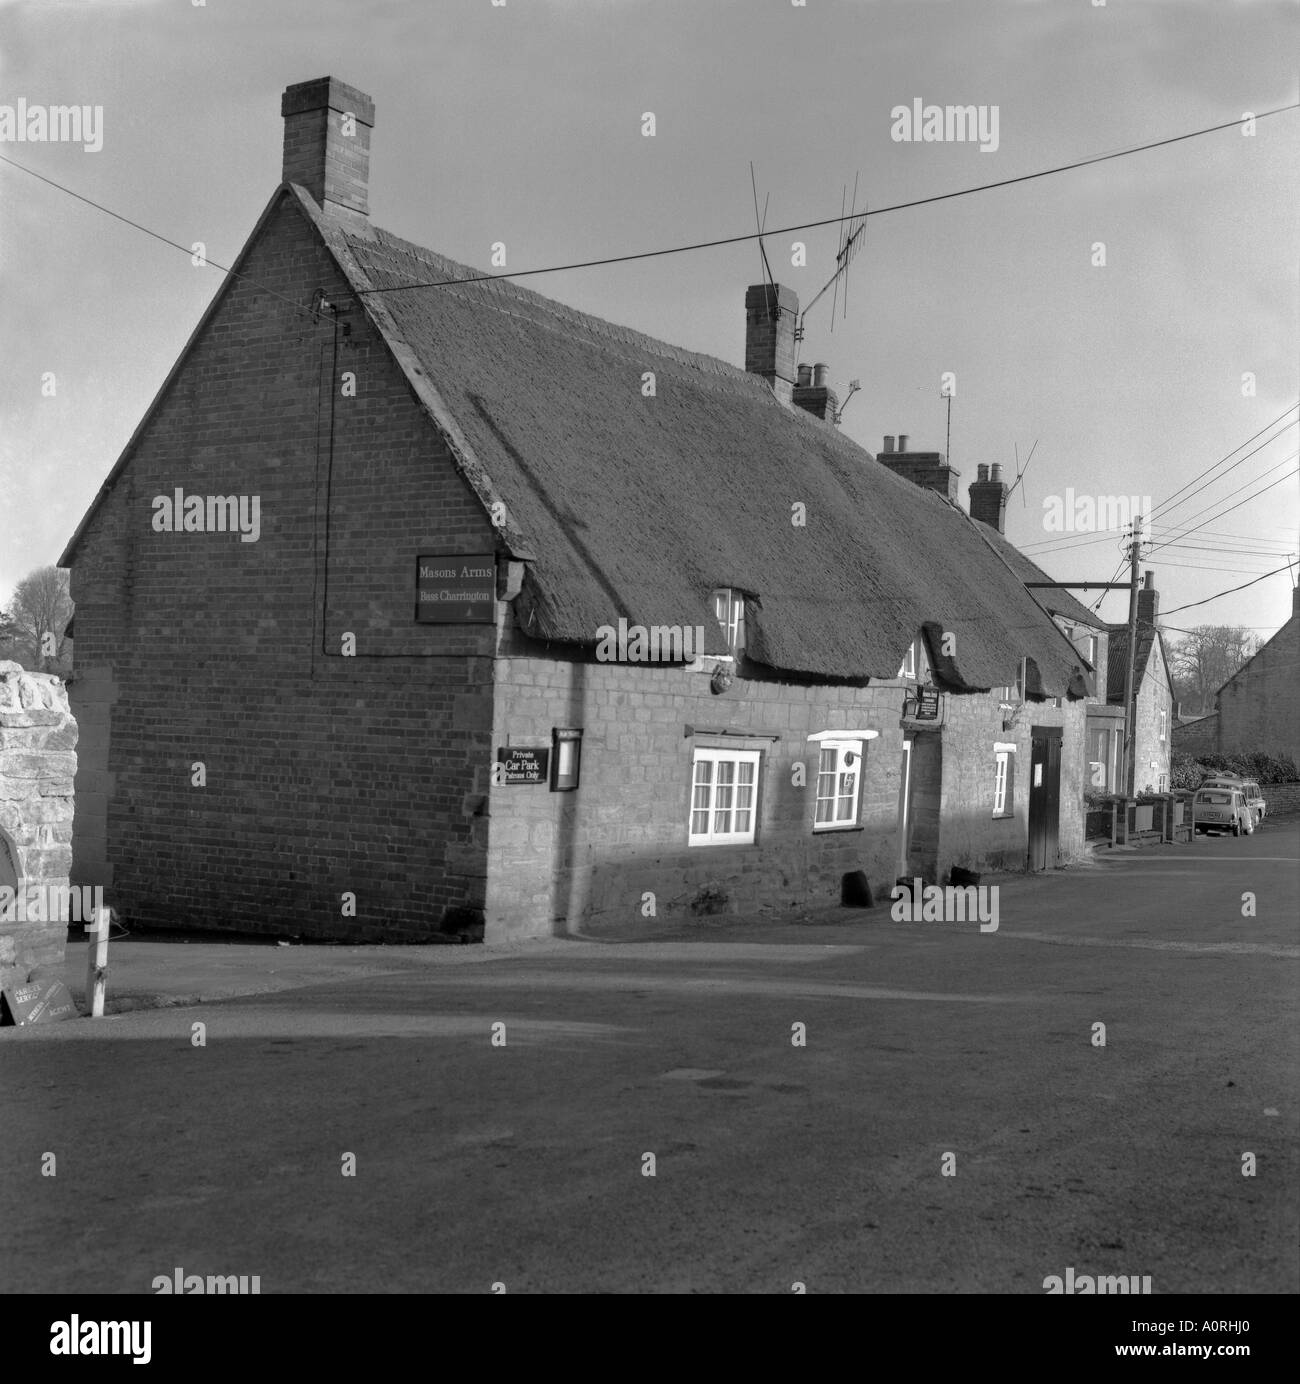 Masons arms in Odcombe Somerset 1973 in 6x6 format 0036 Stock Photo